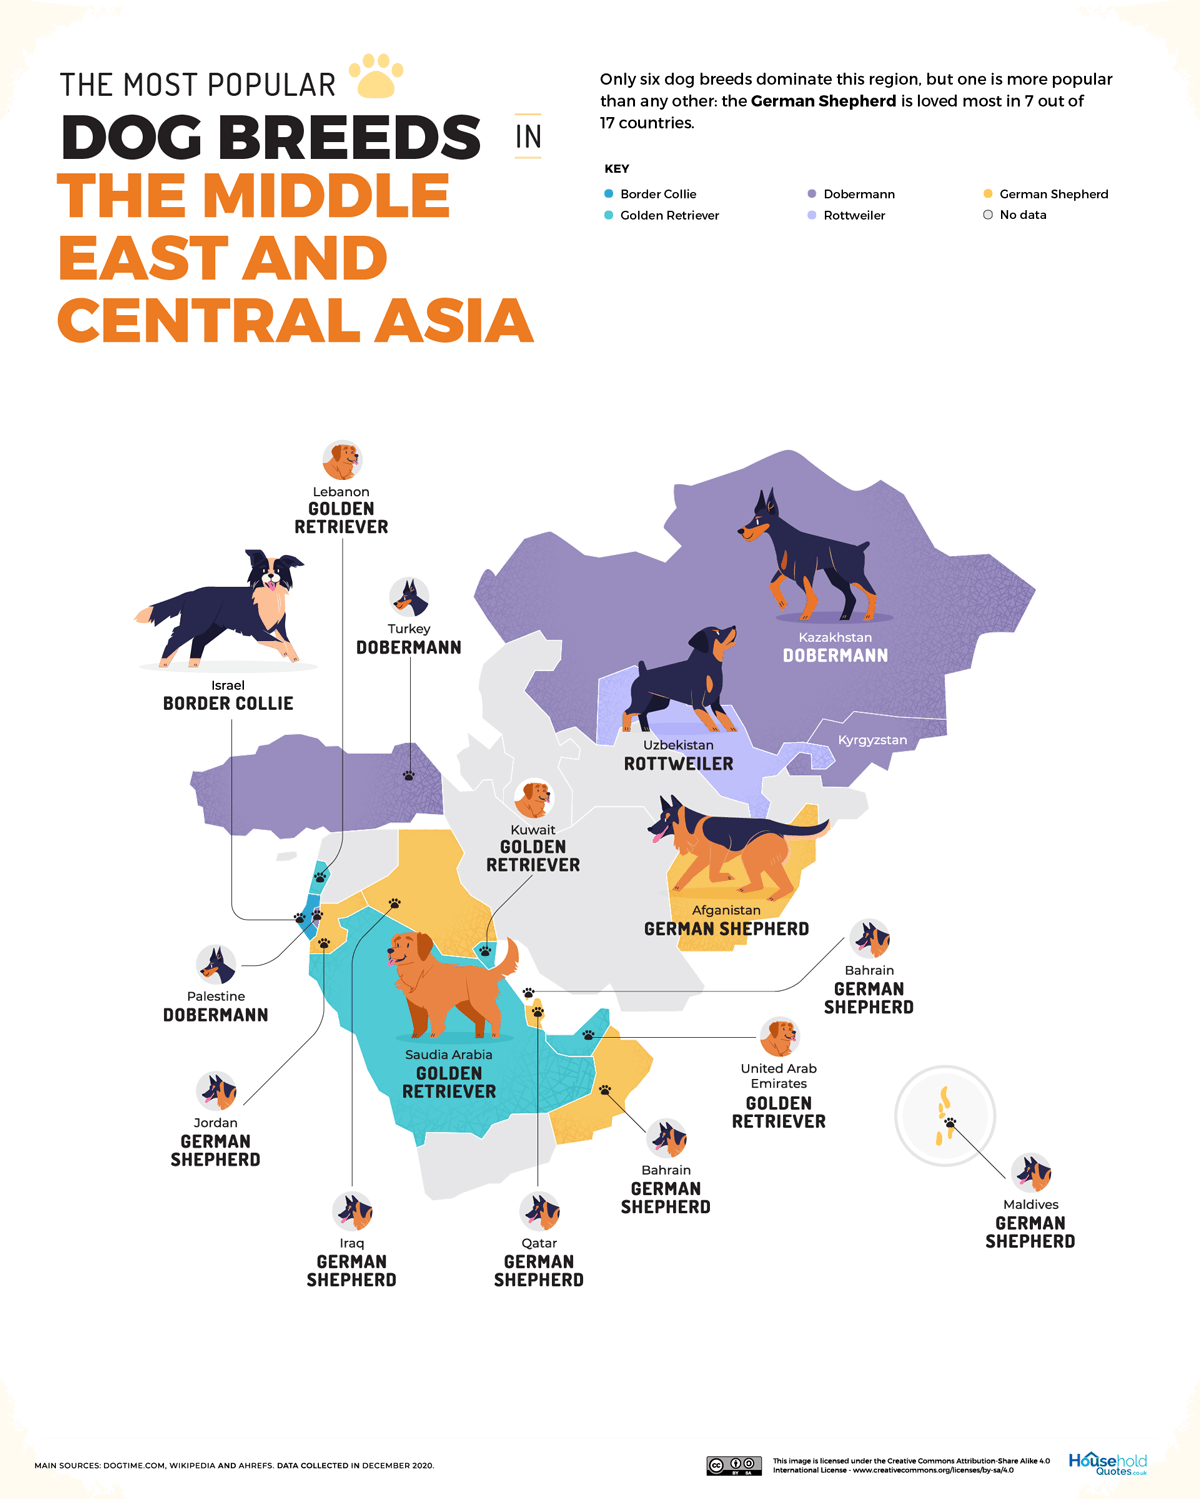 most popular dog breed in the middle east and central asia